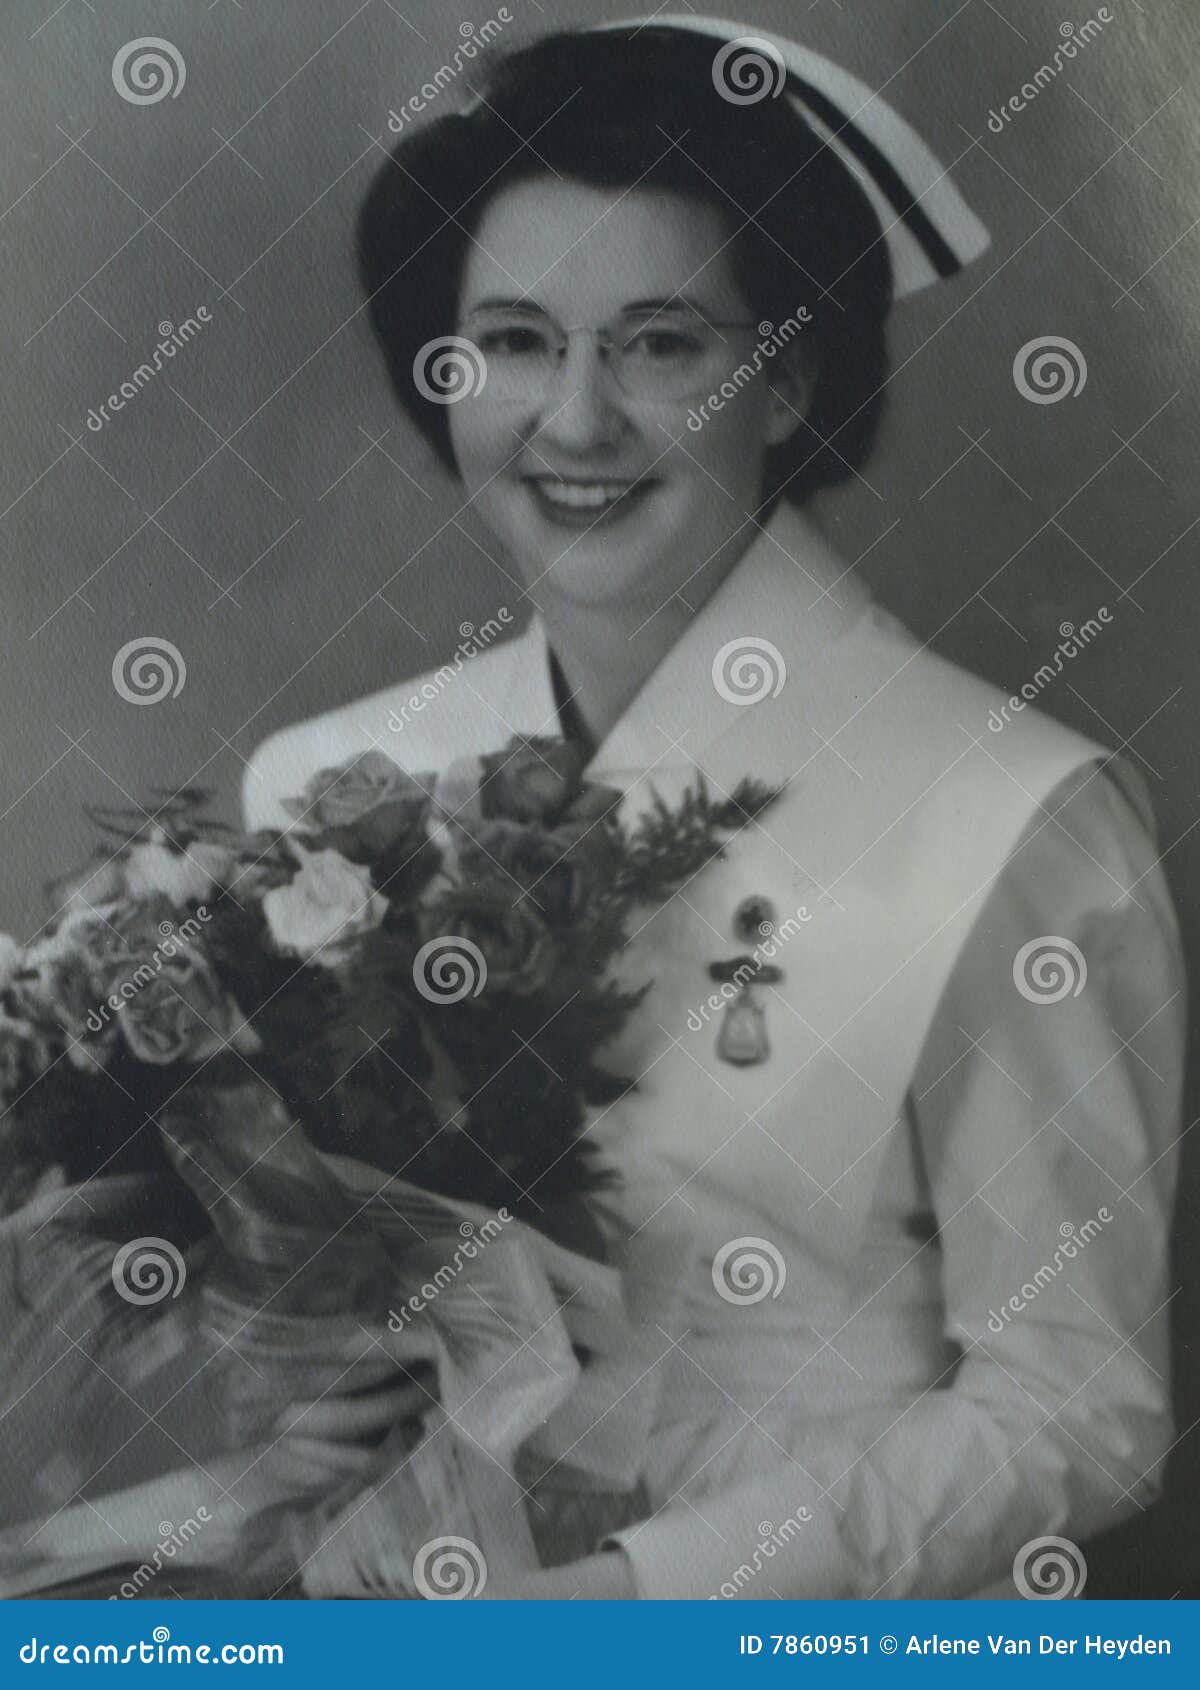 Proud nurse. This lady has had her training and graduated and is a full fledged nurse circa 1950.